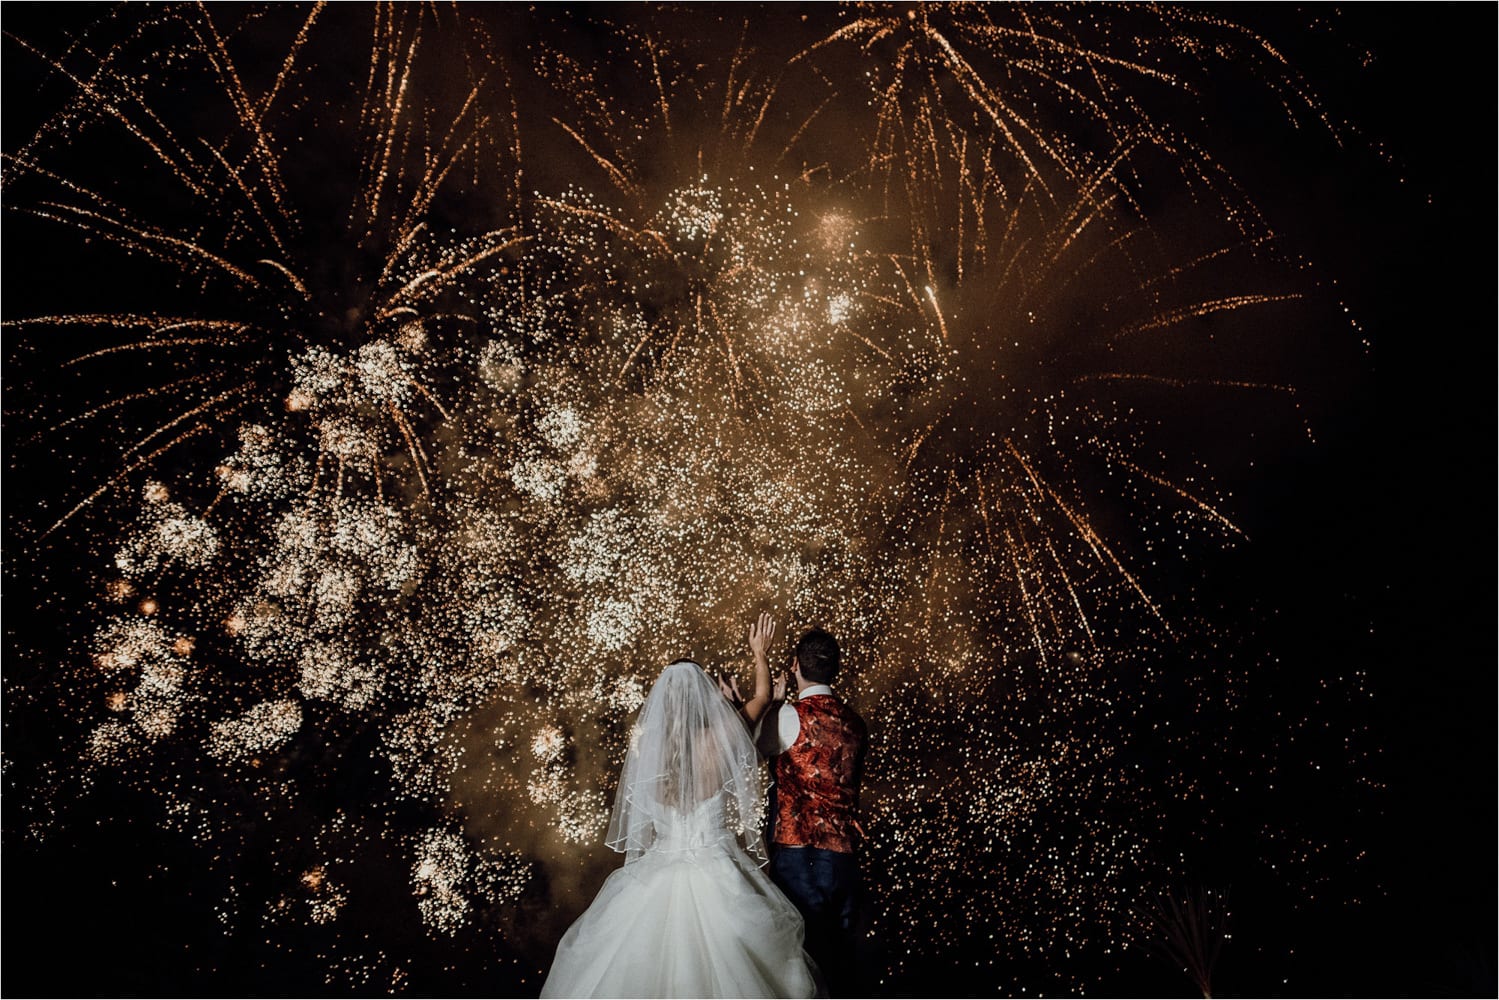 A year in the life of a wedding photographer